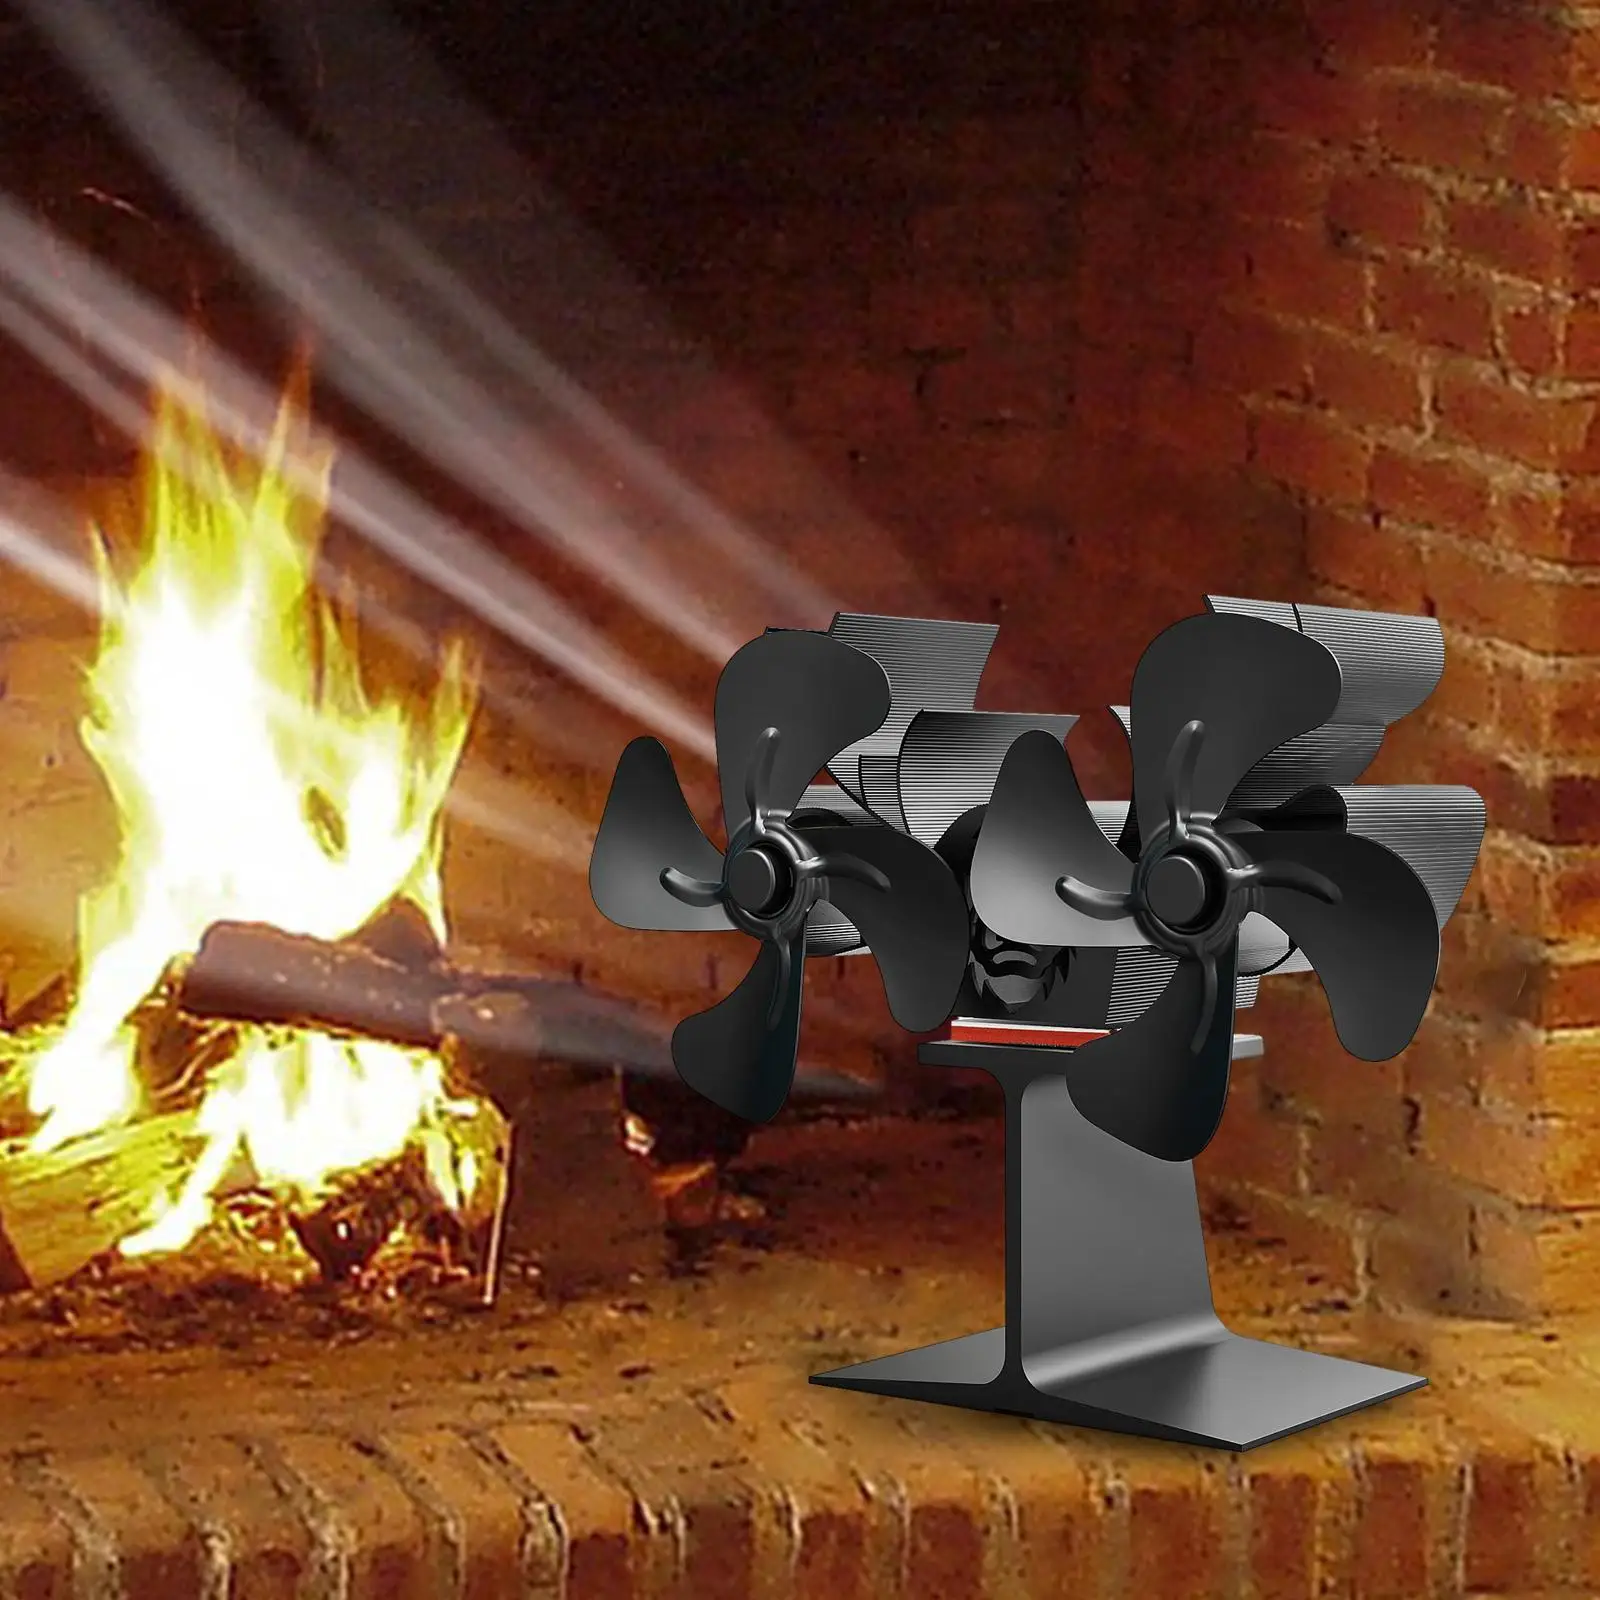 Heat Powered Fireplace Fan with Double Motors Silent Running Aluminum Sturdy